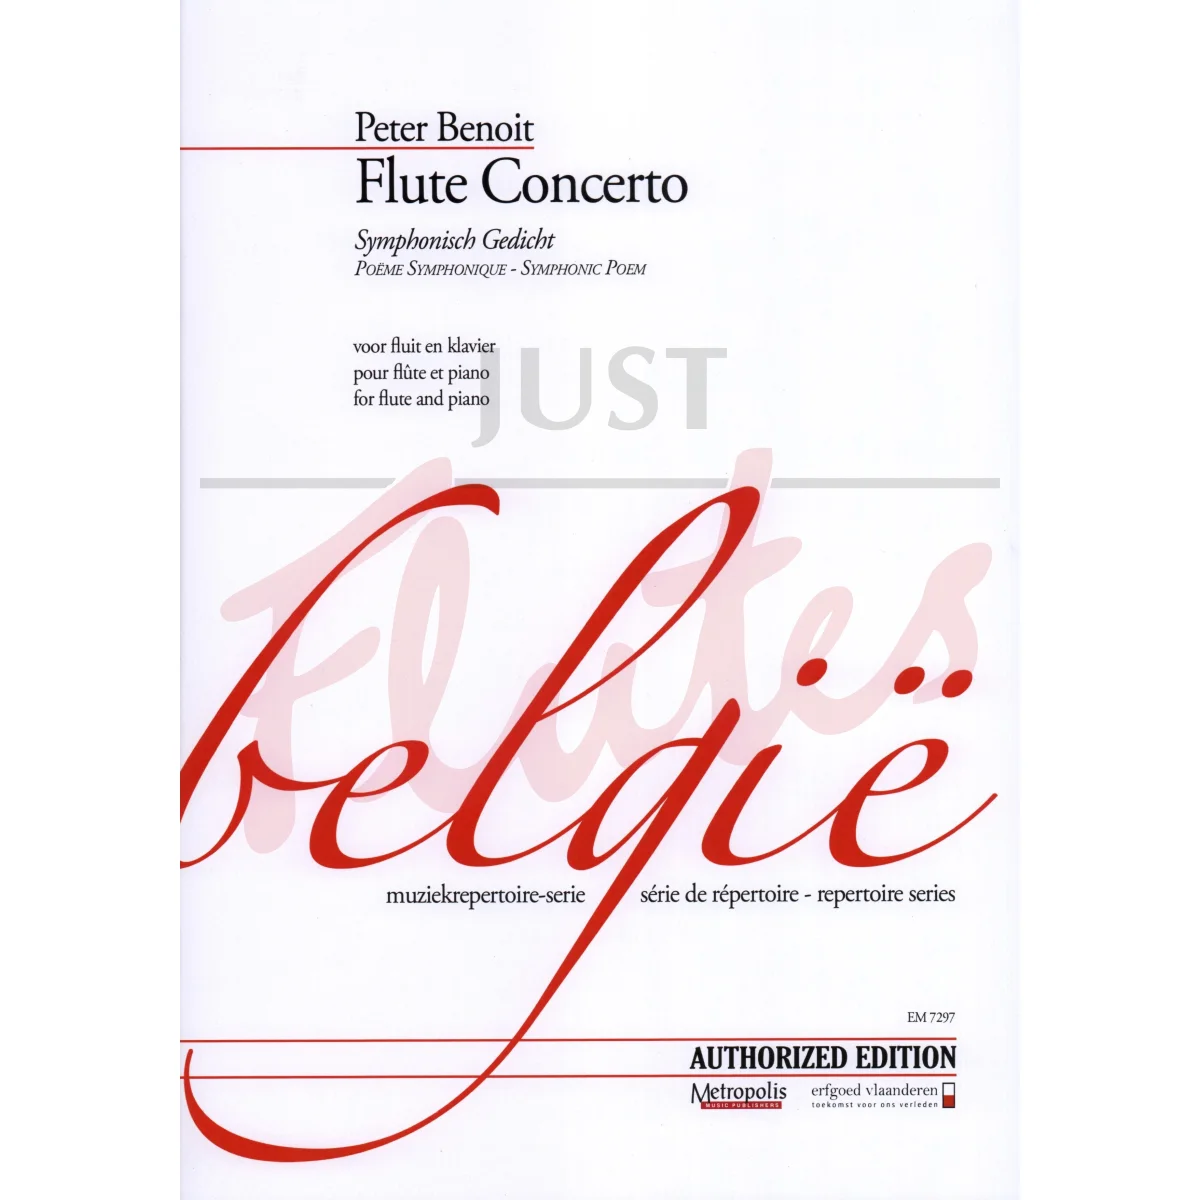 Flute Concerto (Symphonic Poem) for Flute and Piano